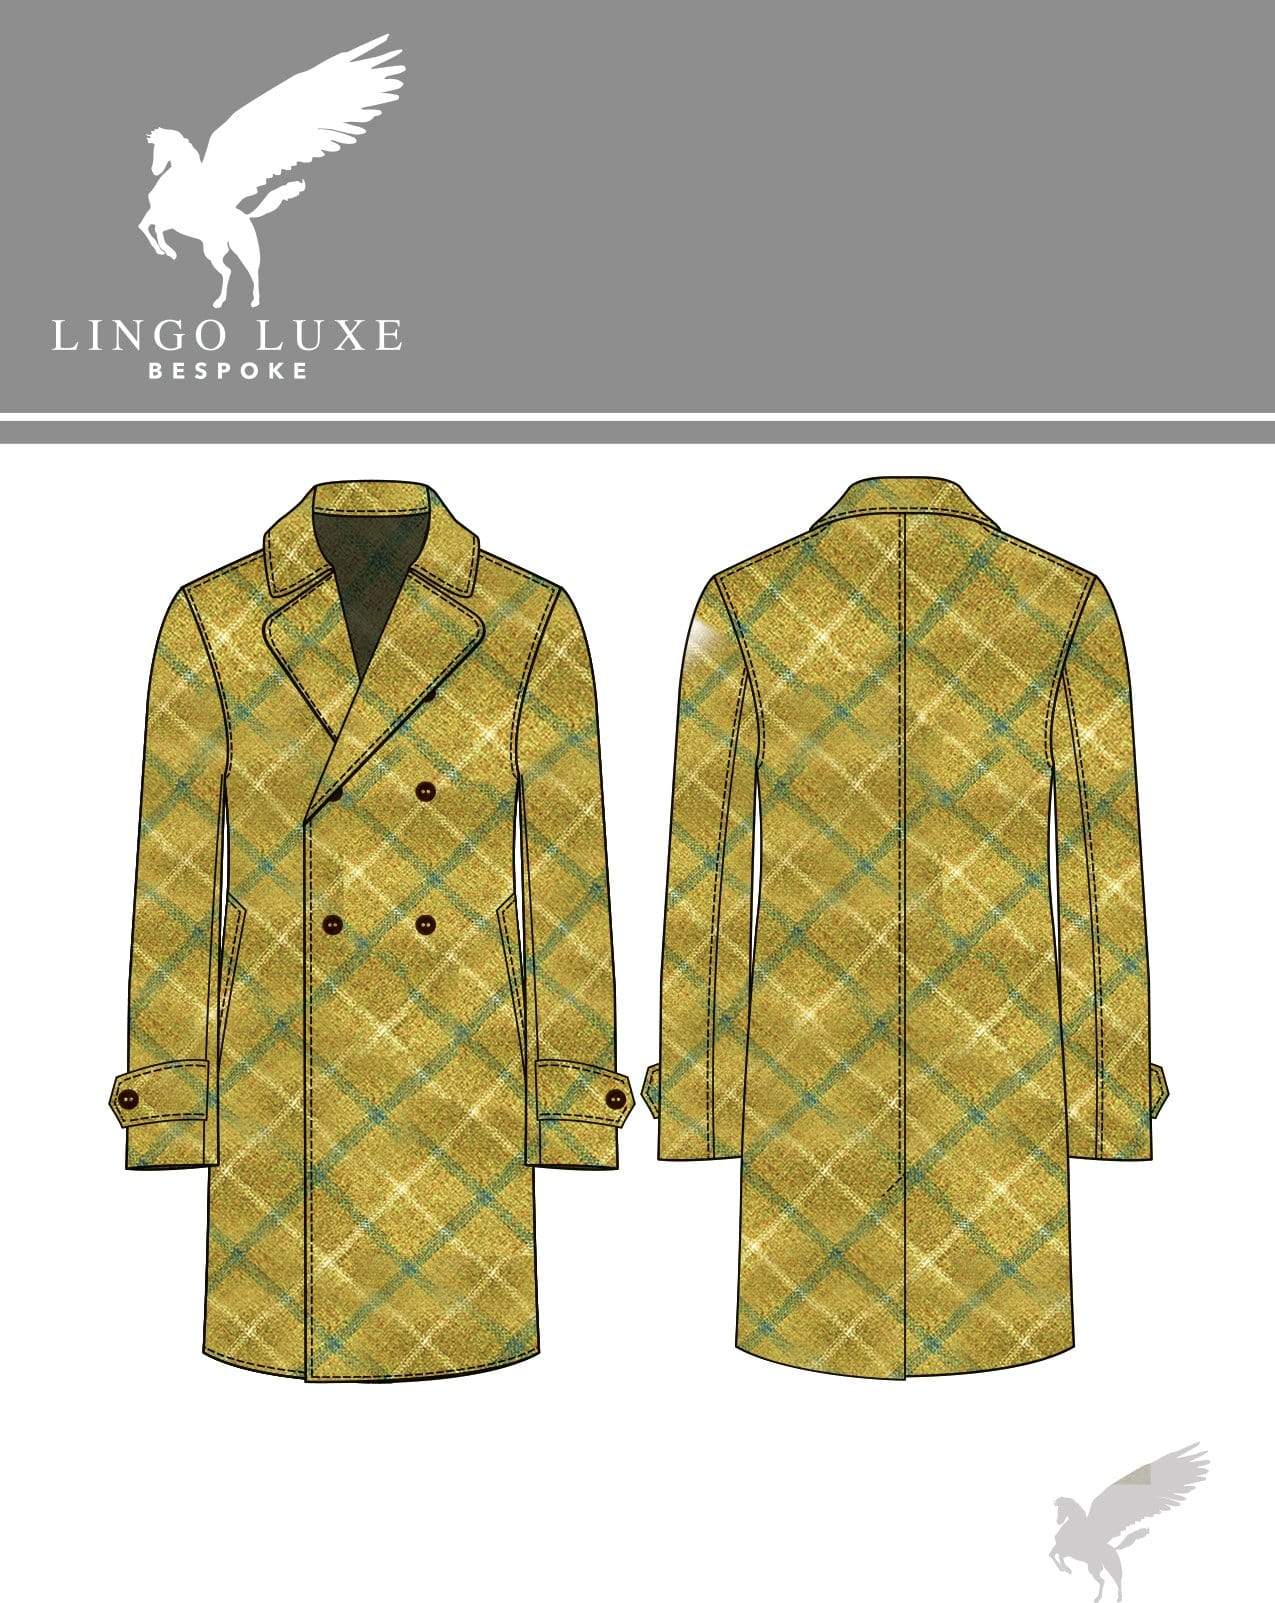 Outerwear | Lingo Luxe The Stately Overcoat | D'or Blue-Lingo Luxe Bespoke